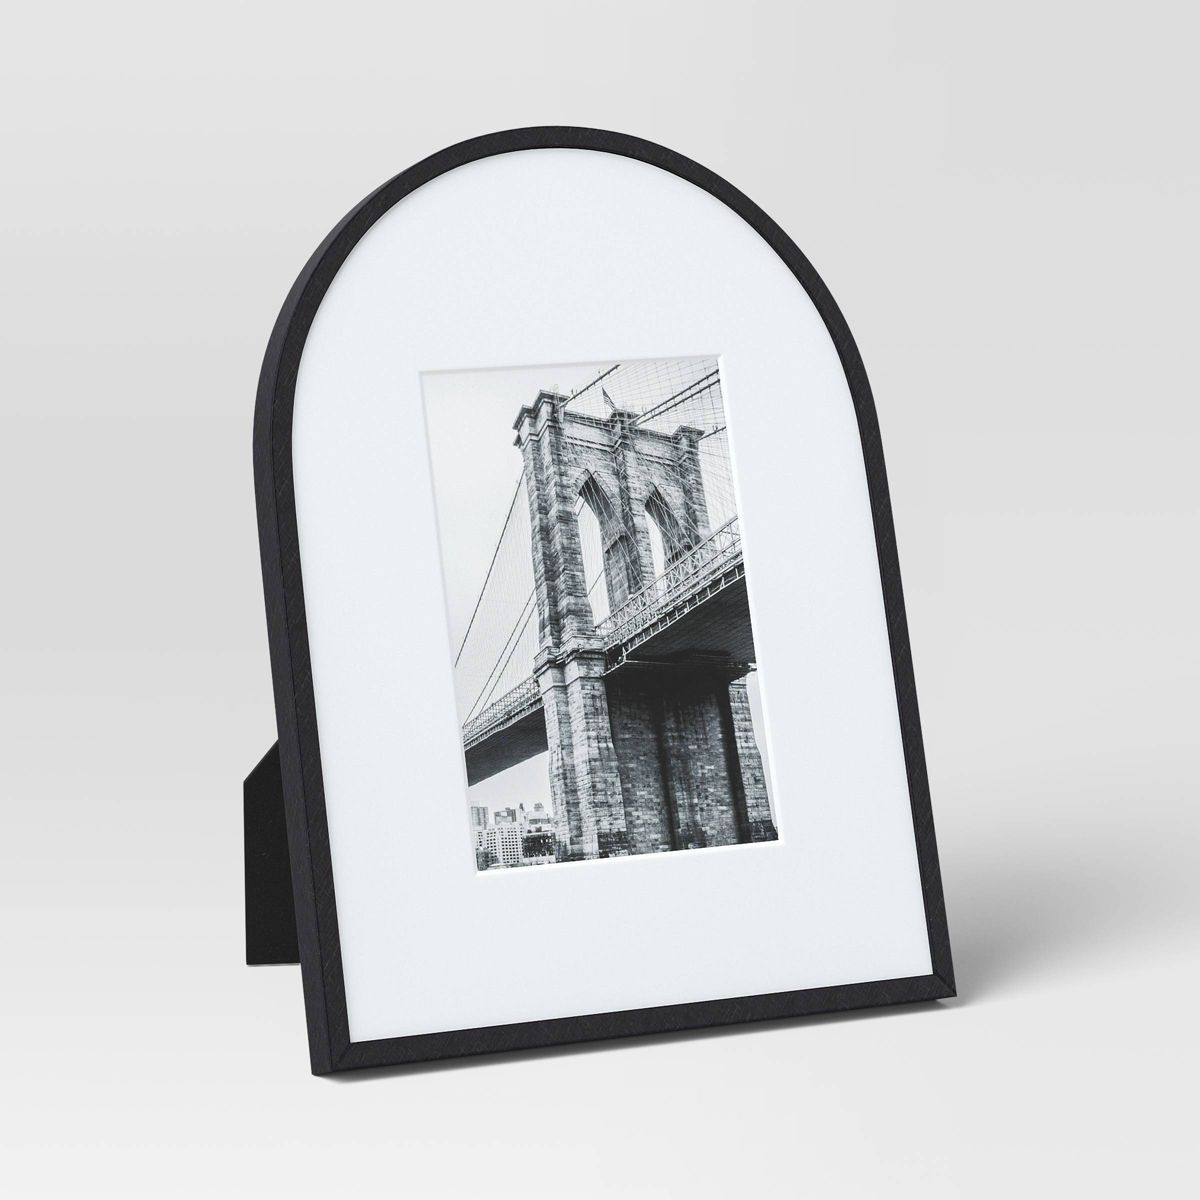 9"x12" Matted to 5"x7" Aluminum Arch Table Frame Black - Threshold™ | Target